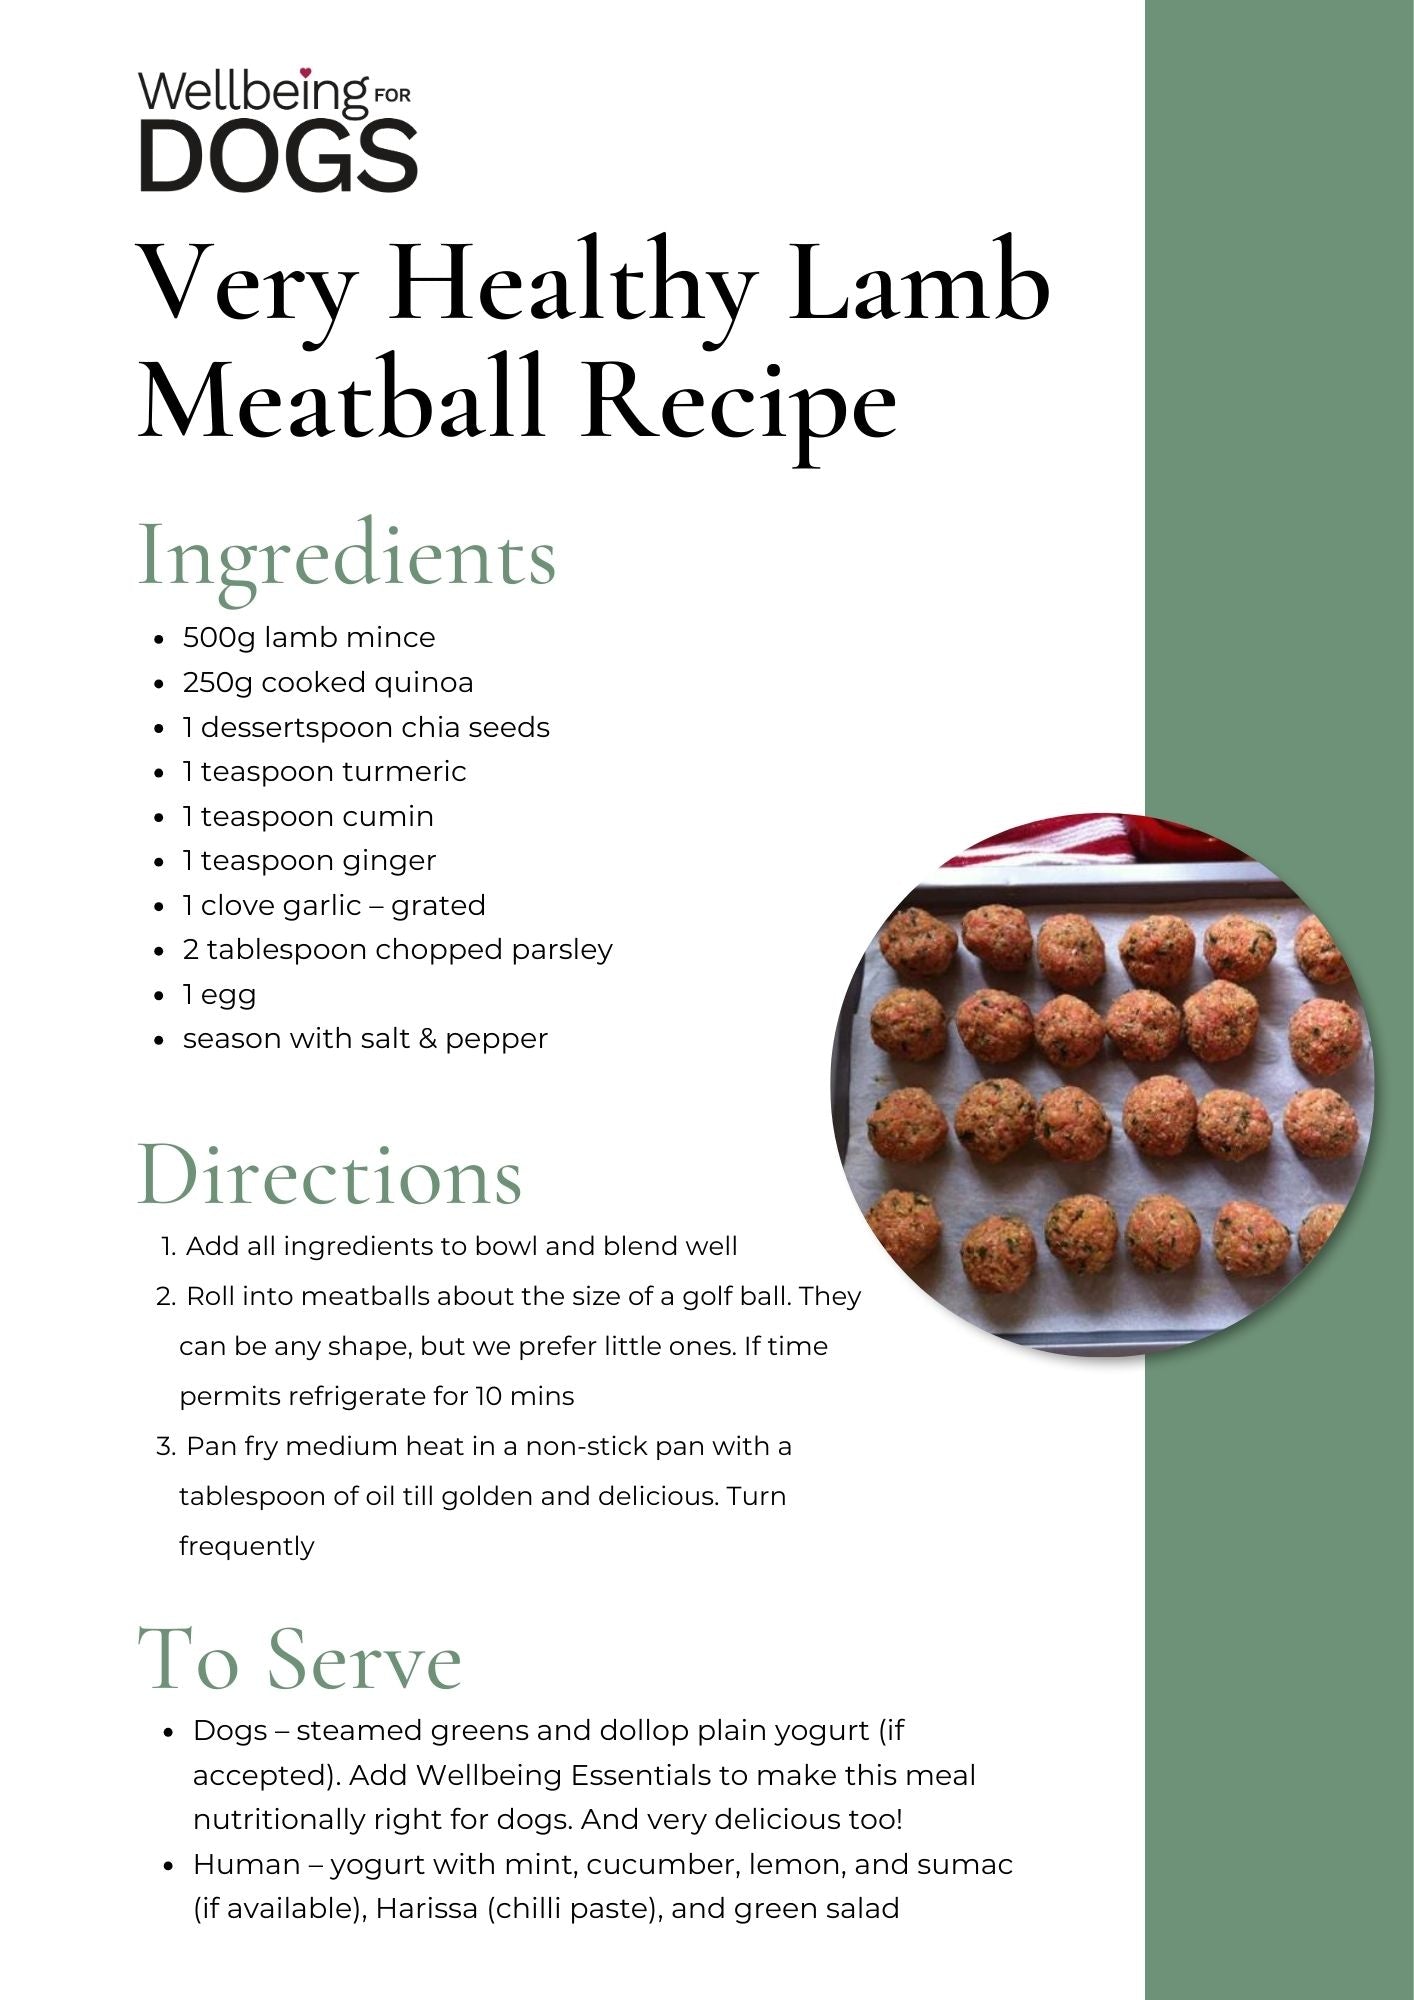 Very Healthy Lamb Meatball Recipe for Dogs